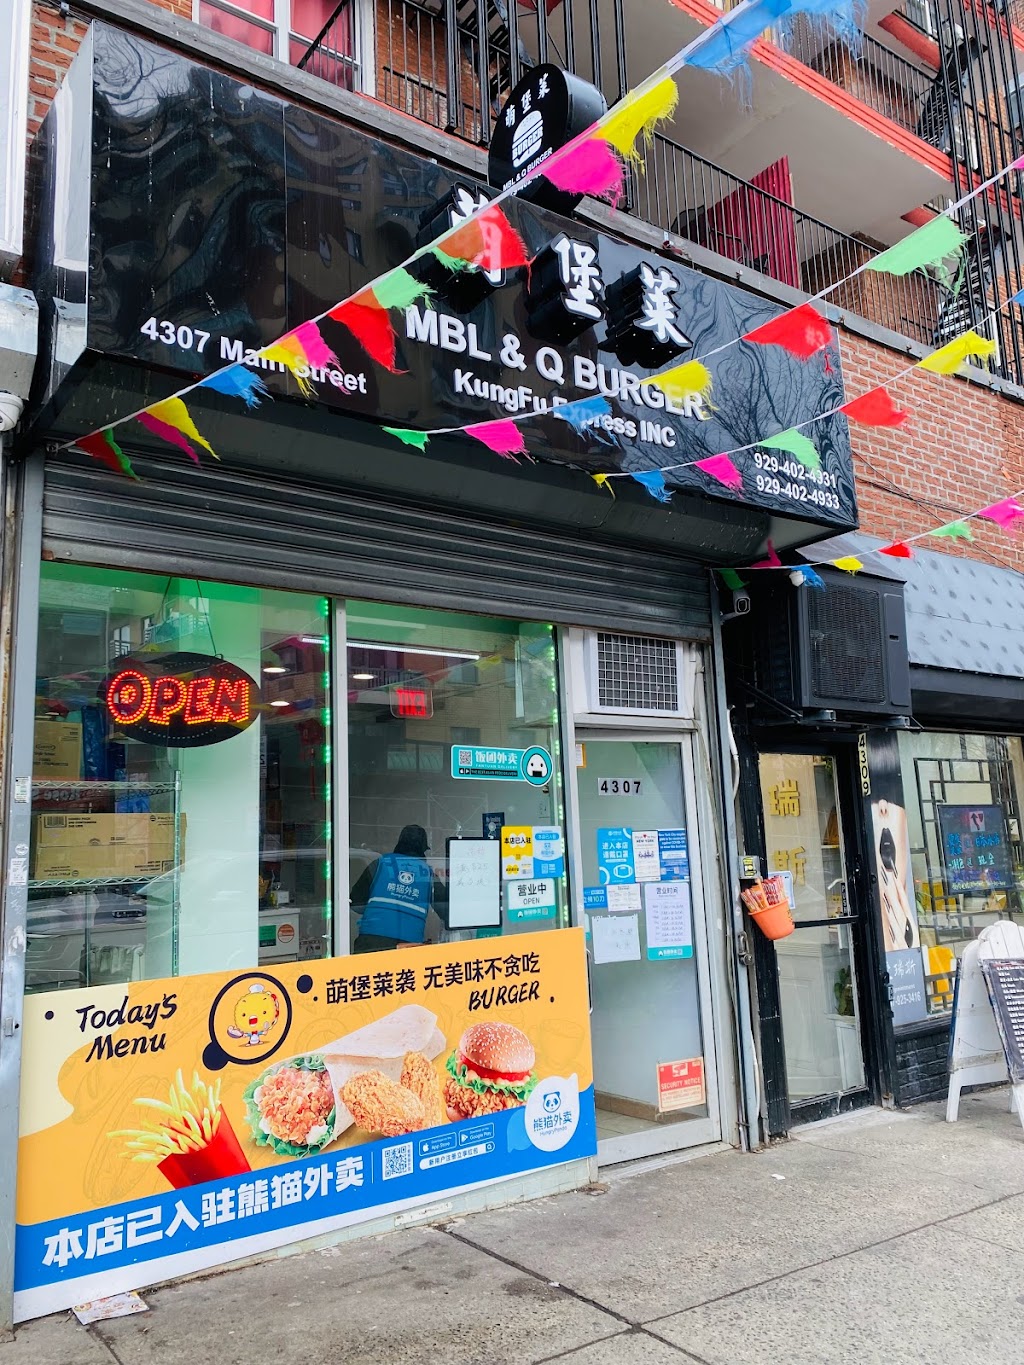 MBL&Q Burger | meal takeaway | 4307 Main St, Queens, NY 11355, USA | 9292035194 OR +1 929-203-5194